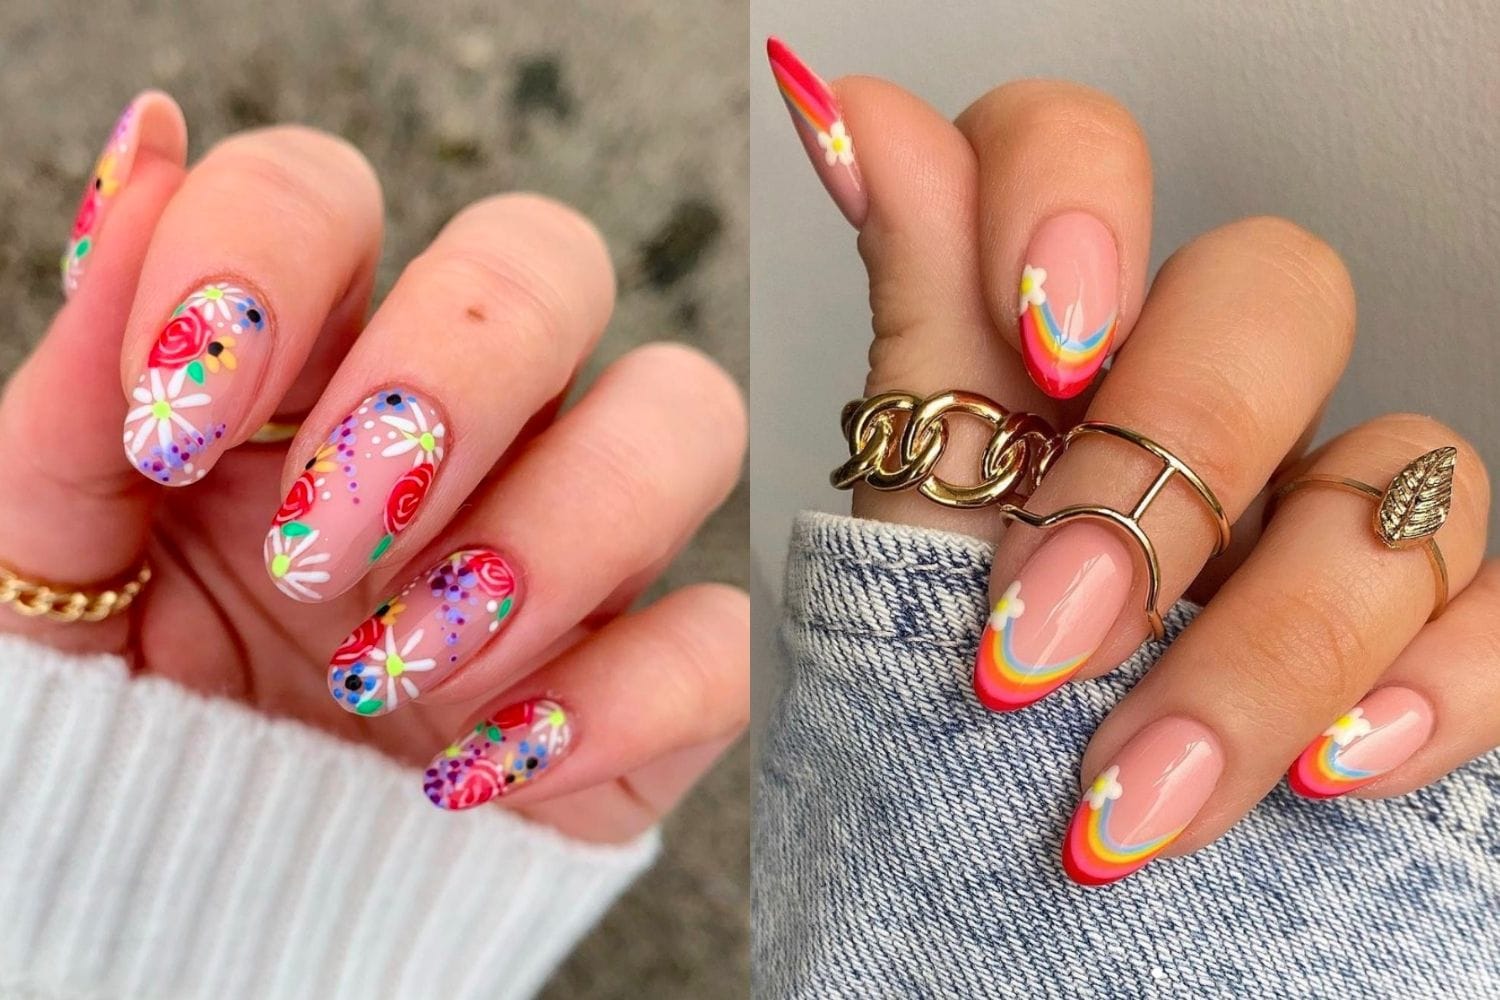 7. Spring Nail Trends for Fingernails and Toenails - wide 3